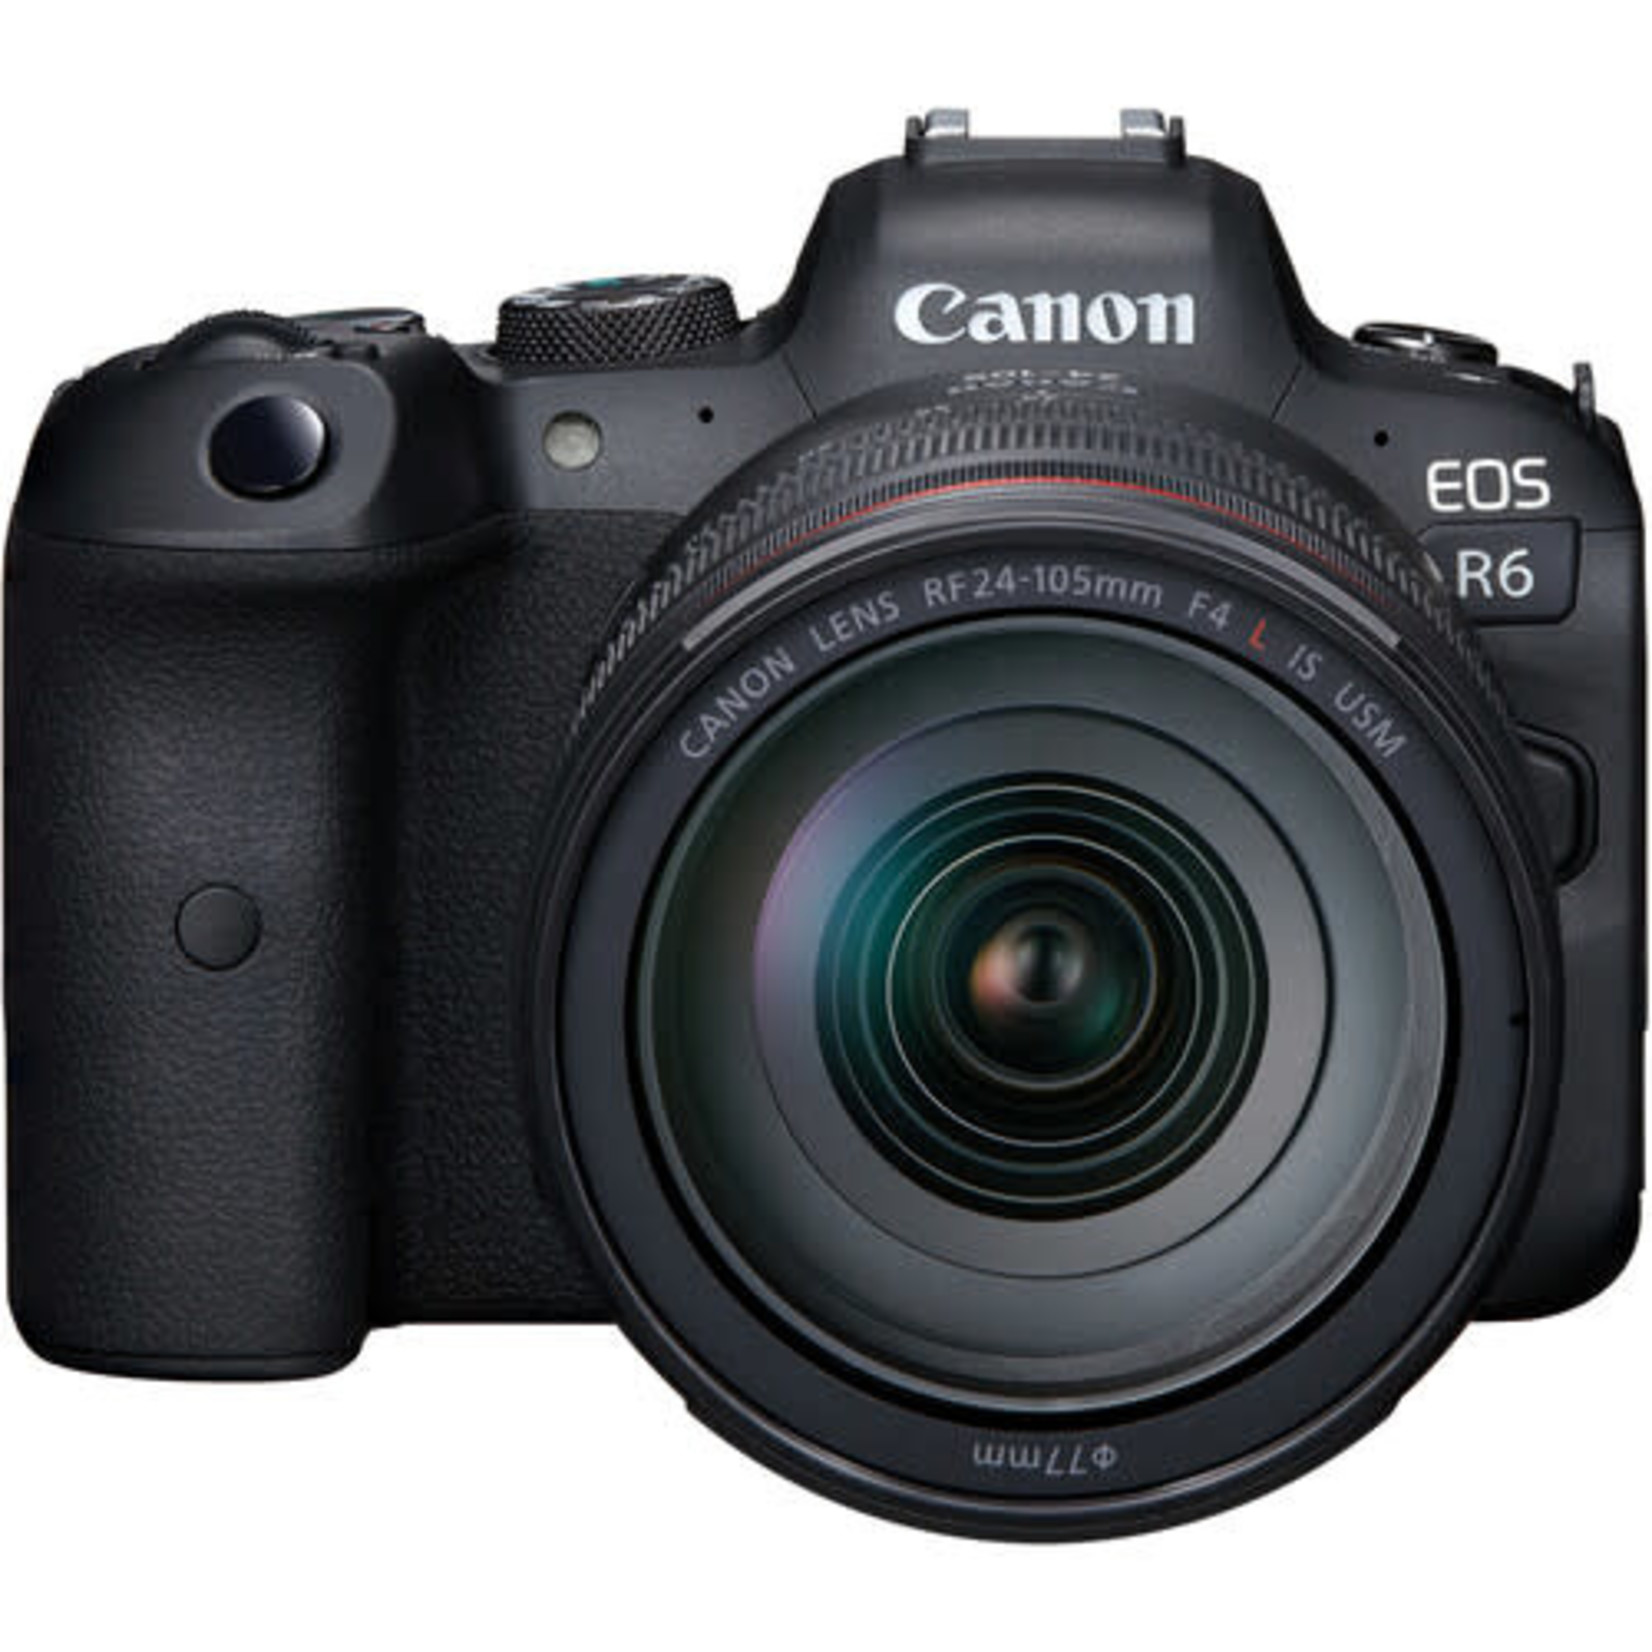 Canon Canon EOS R6 Mirrorless Digital Camera with 24-105mm f/4L Lens